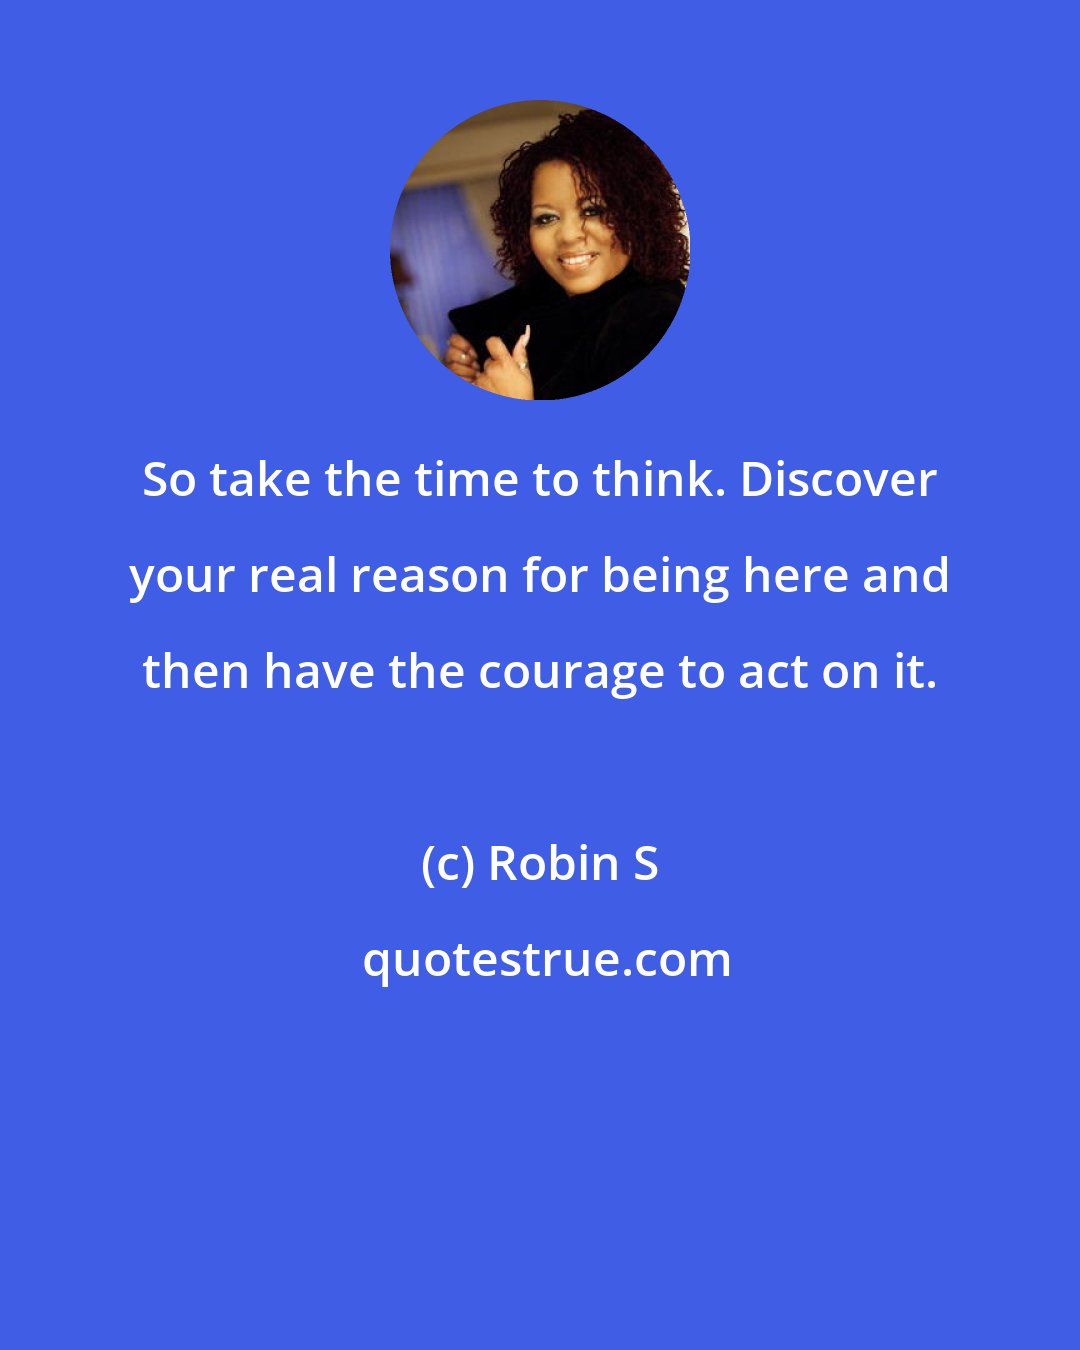 Robin S: So take the time to think. Discover your real reason for being here and then have the courage to act on it.